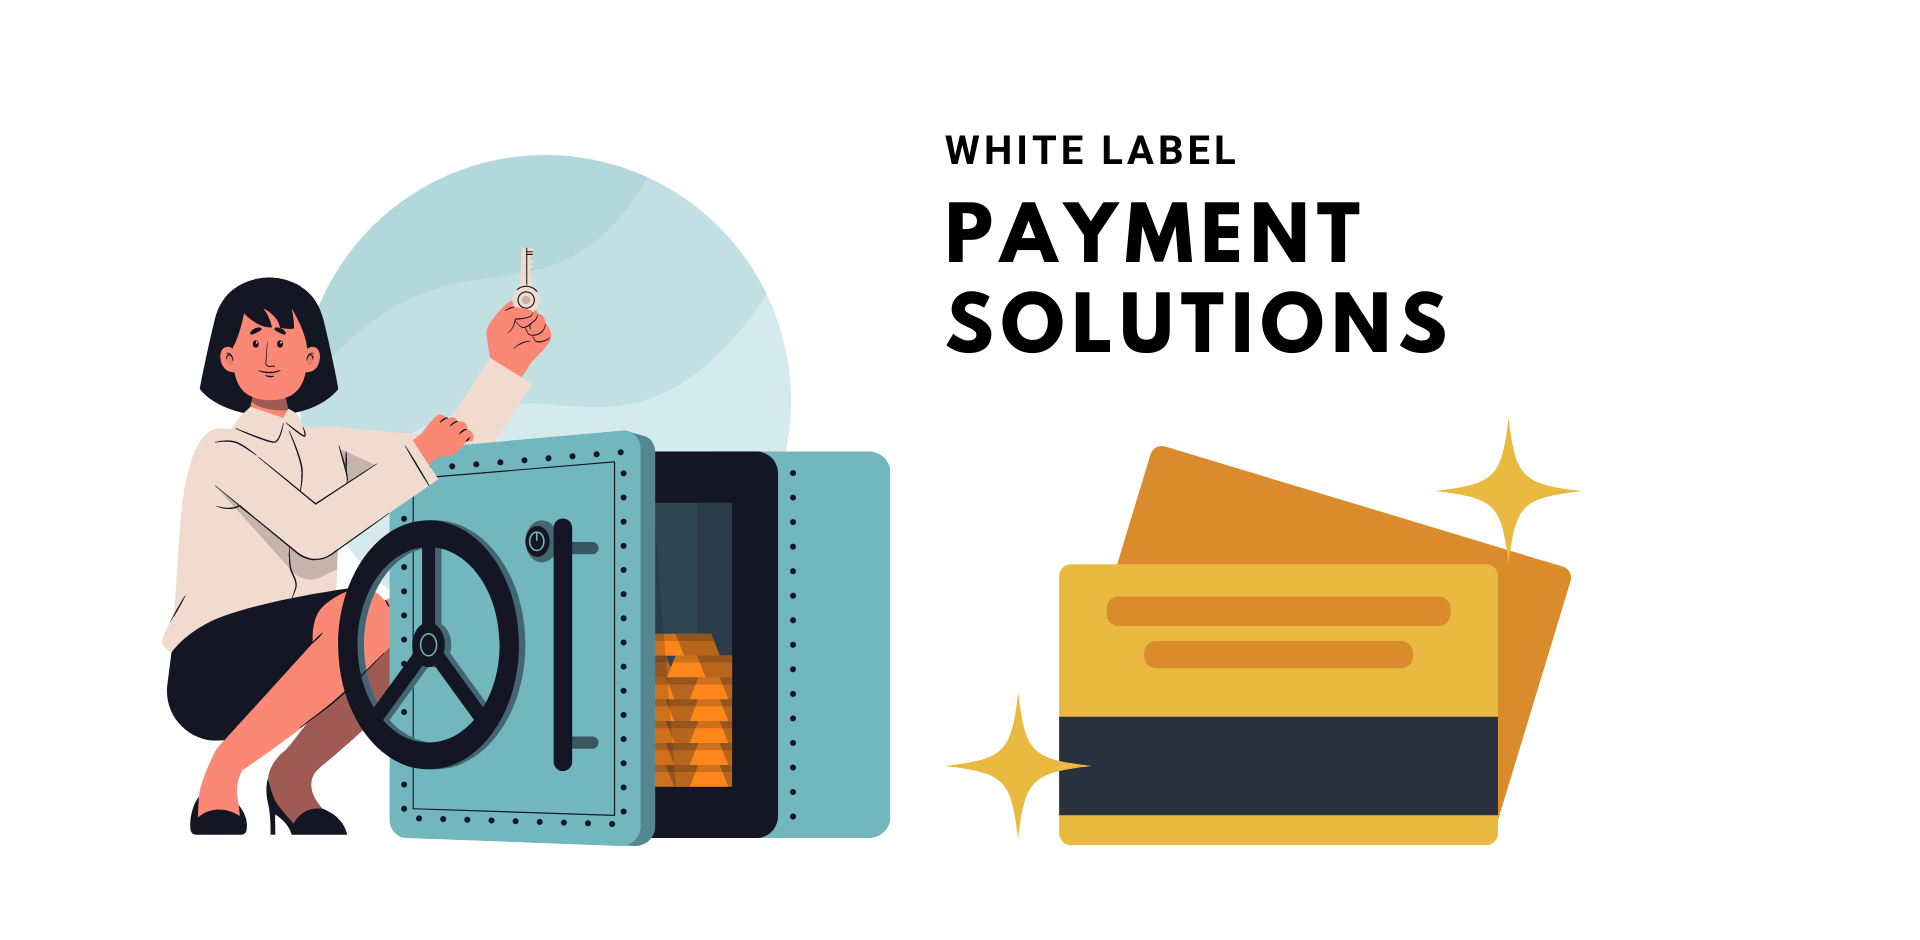 Complex Payment Solutions Based on the White Label Model